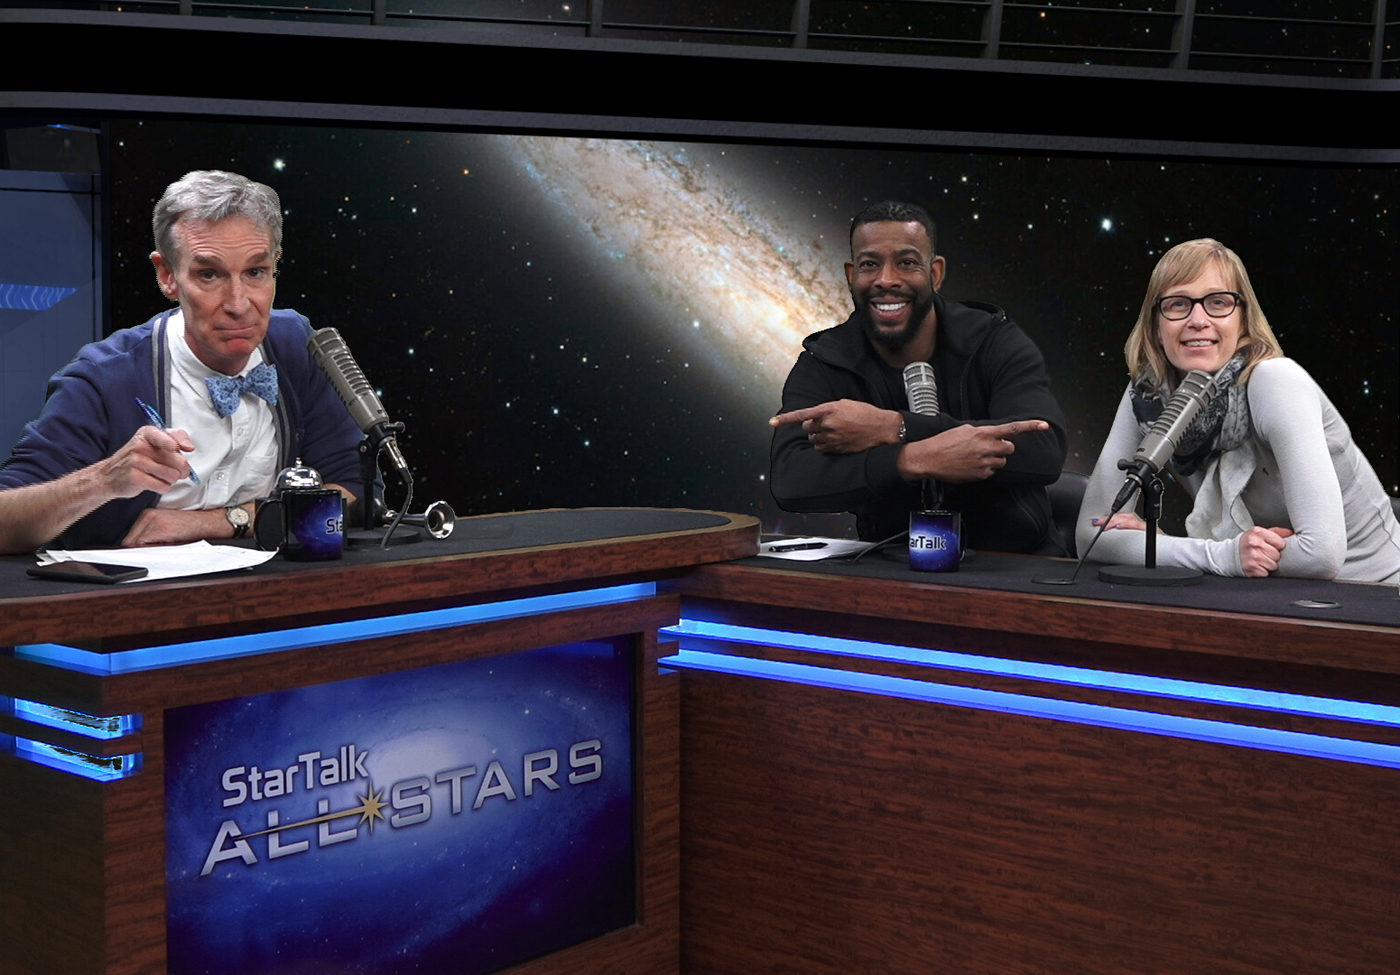 Ben Ratner's photo of Bill Nye, Chuck Nice, and Kate Marvel talking climate change in the StarTalk All-Stars studio.